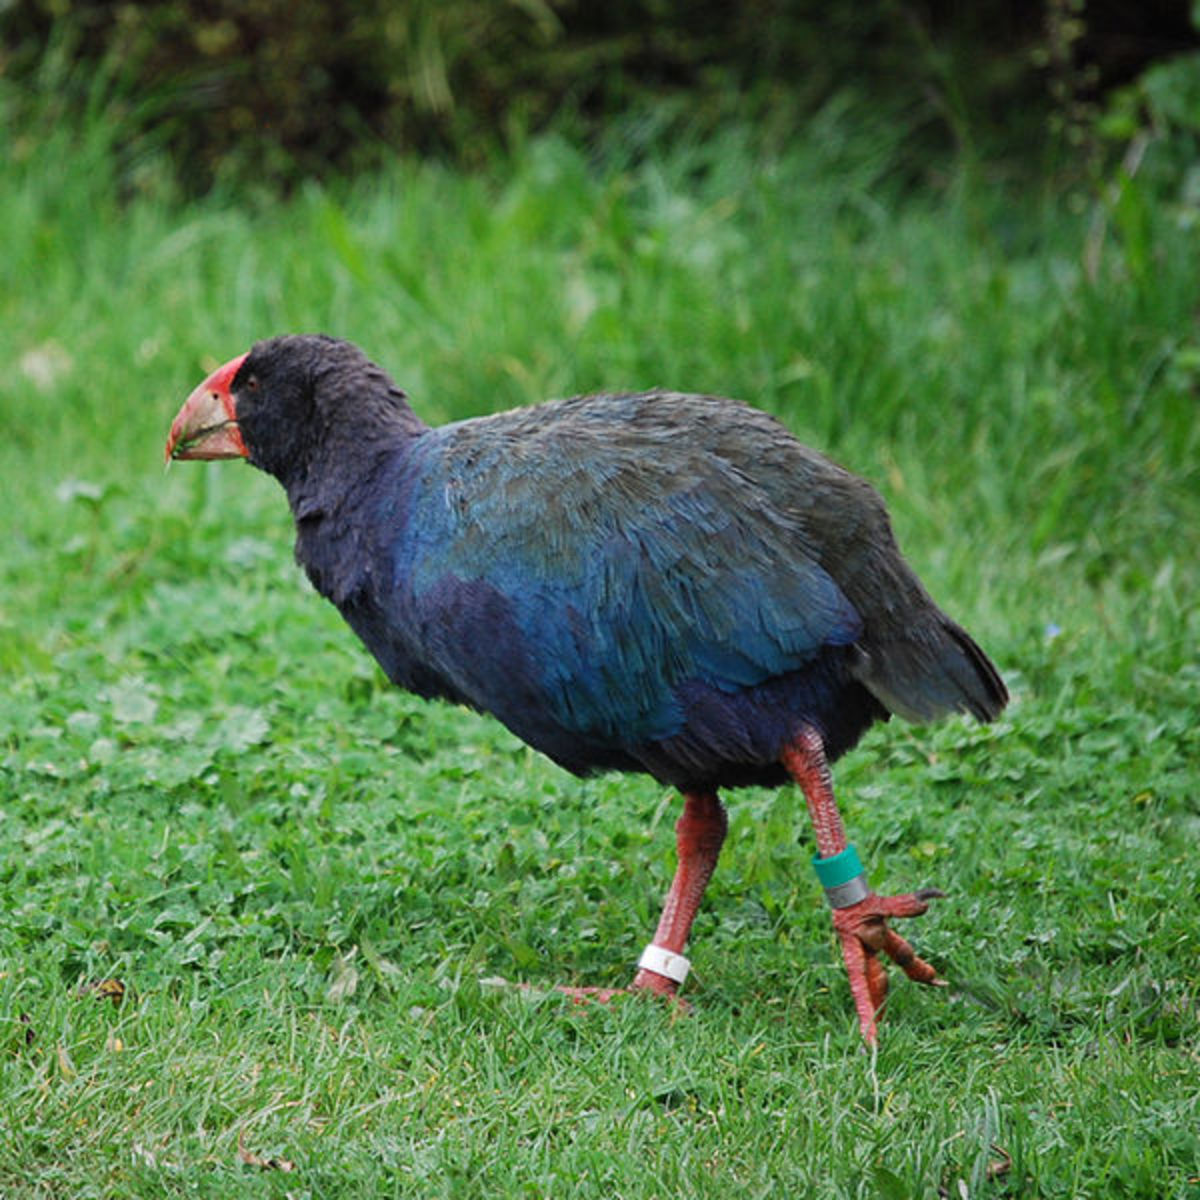 The Takahe- a giant flightless form of coot that was thought to be extinct until they were rediscovered in 1984.